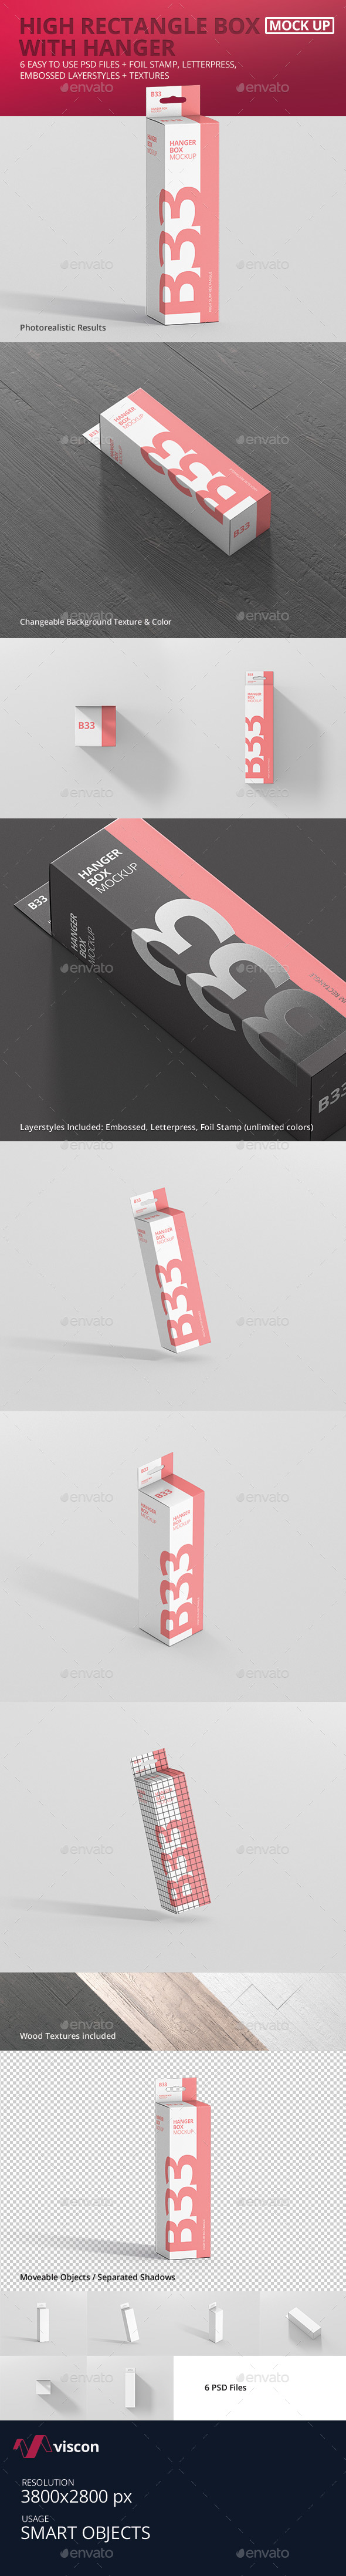 Download Box Mockup High Slim Rectangle Size With Hanger By Visconbiz Graphicriver PSD Mockup Templates